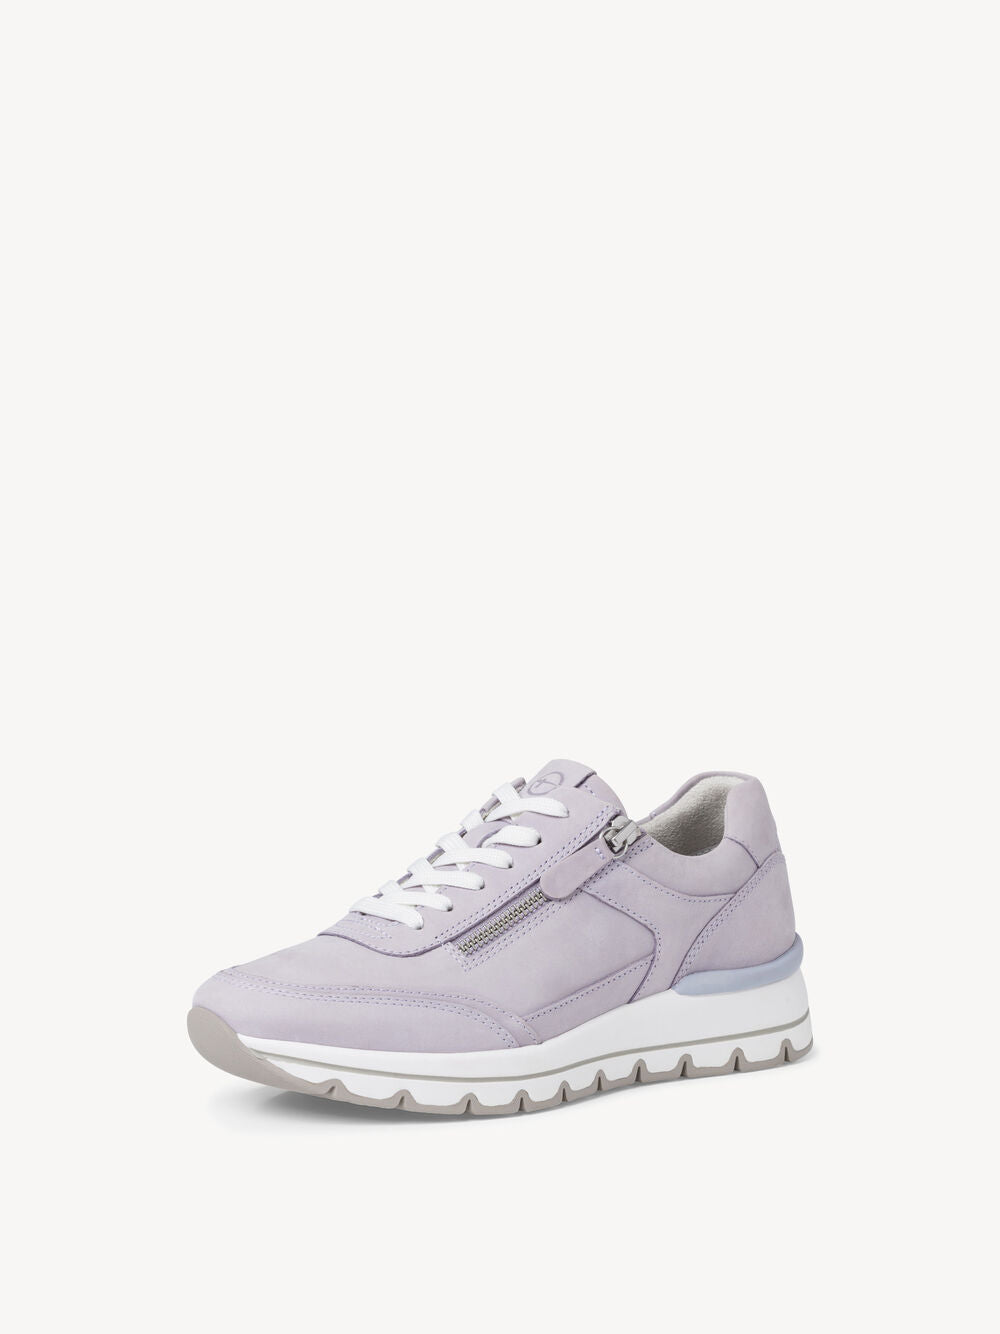 Tamaris pure relax lilac trainer 23725